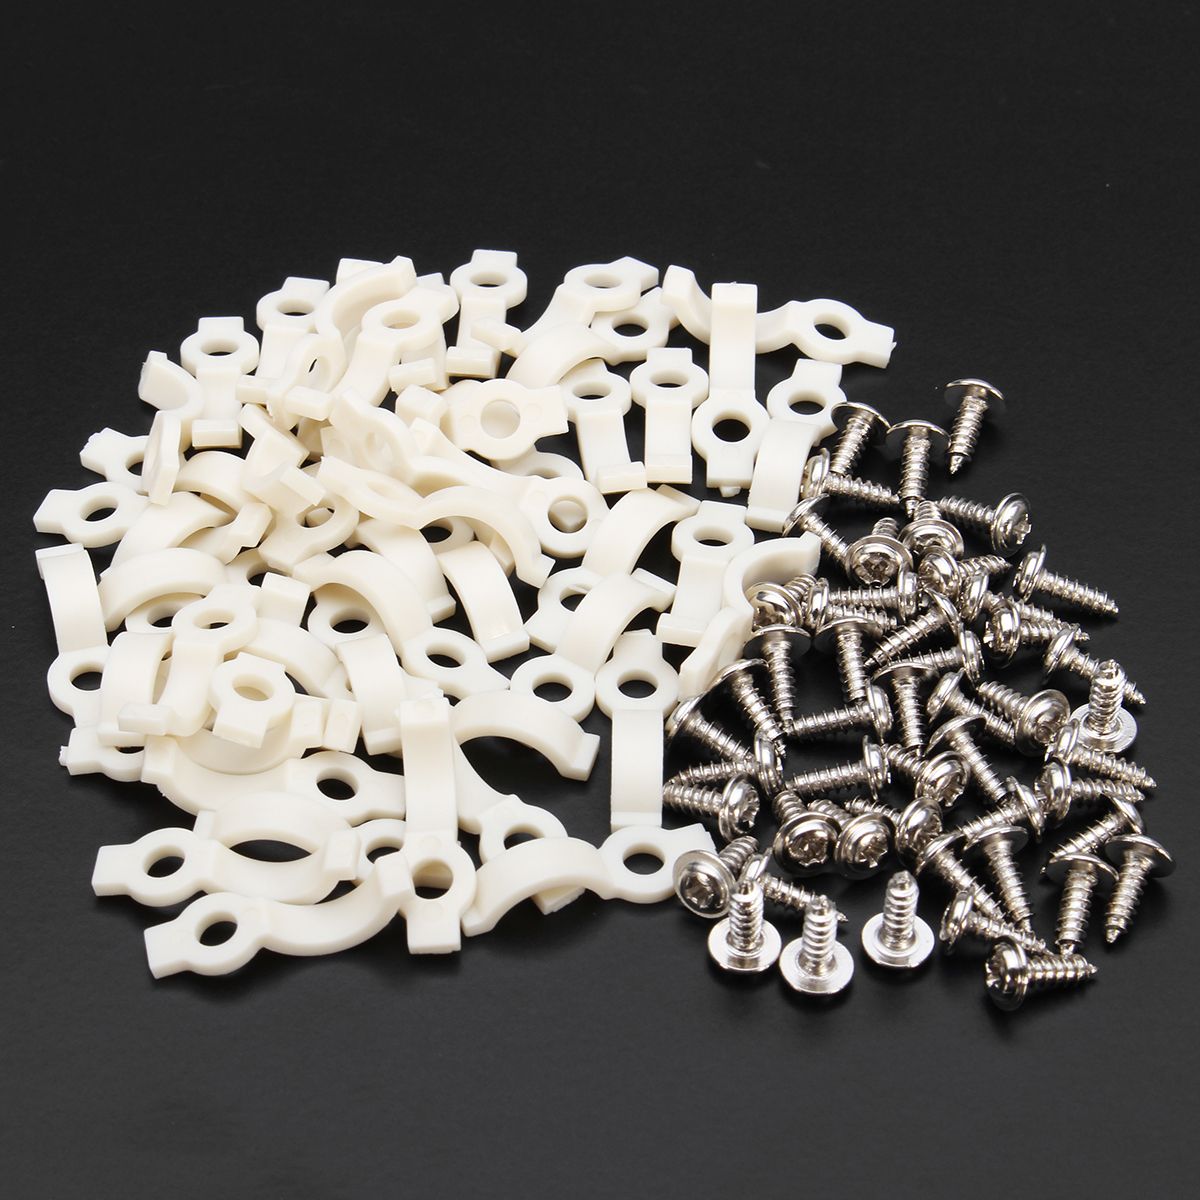 50PCS-8MM-Width-Mounting-Brackets-Fixing-Screw-Clip-for-3528-LED-Strip-Light-1241852